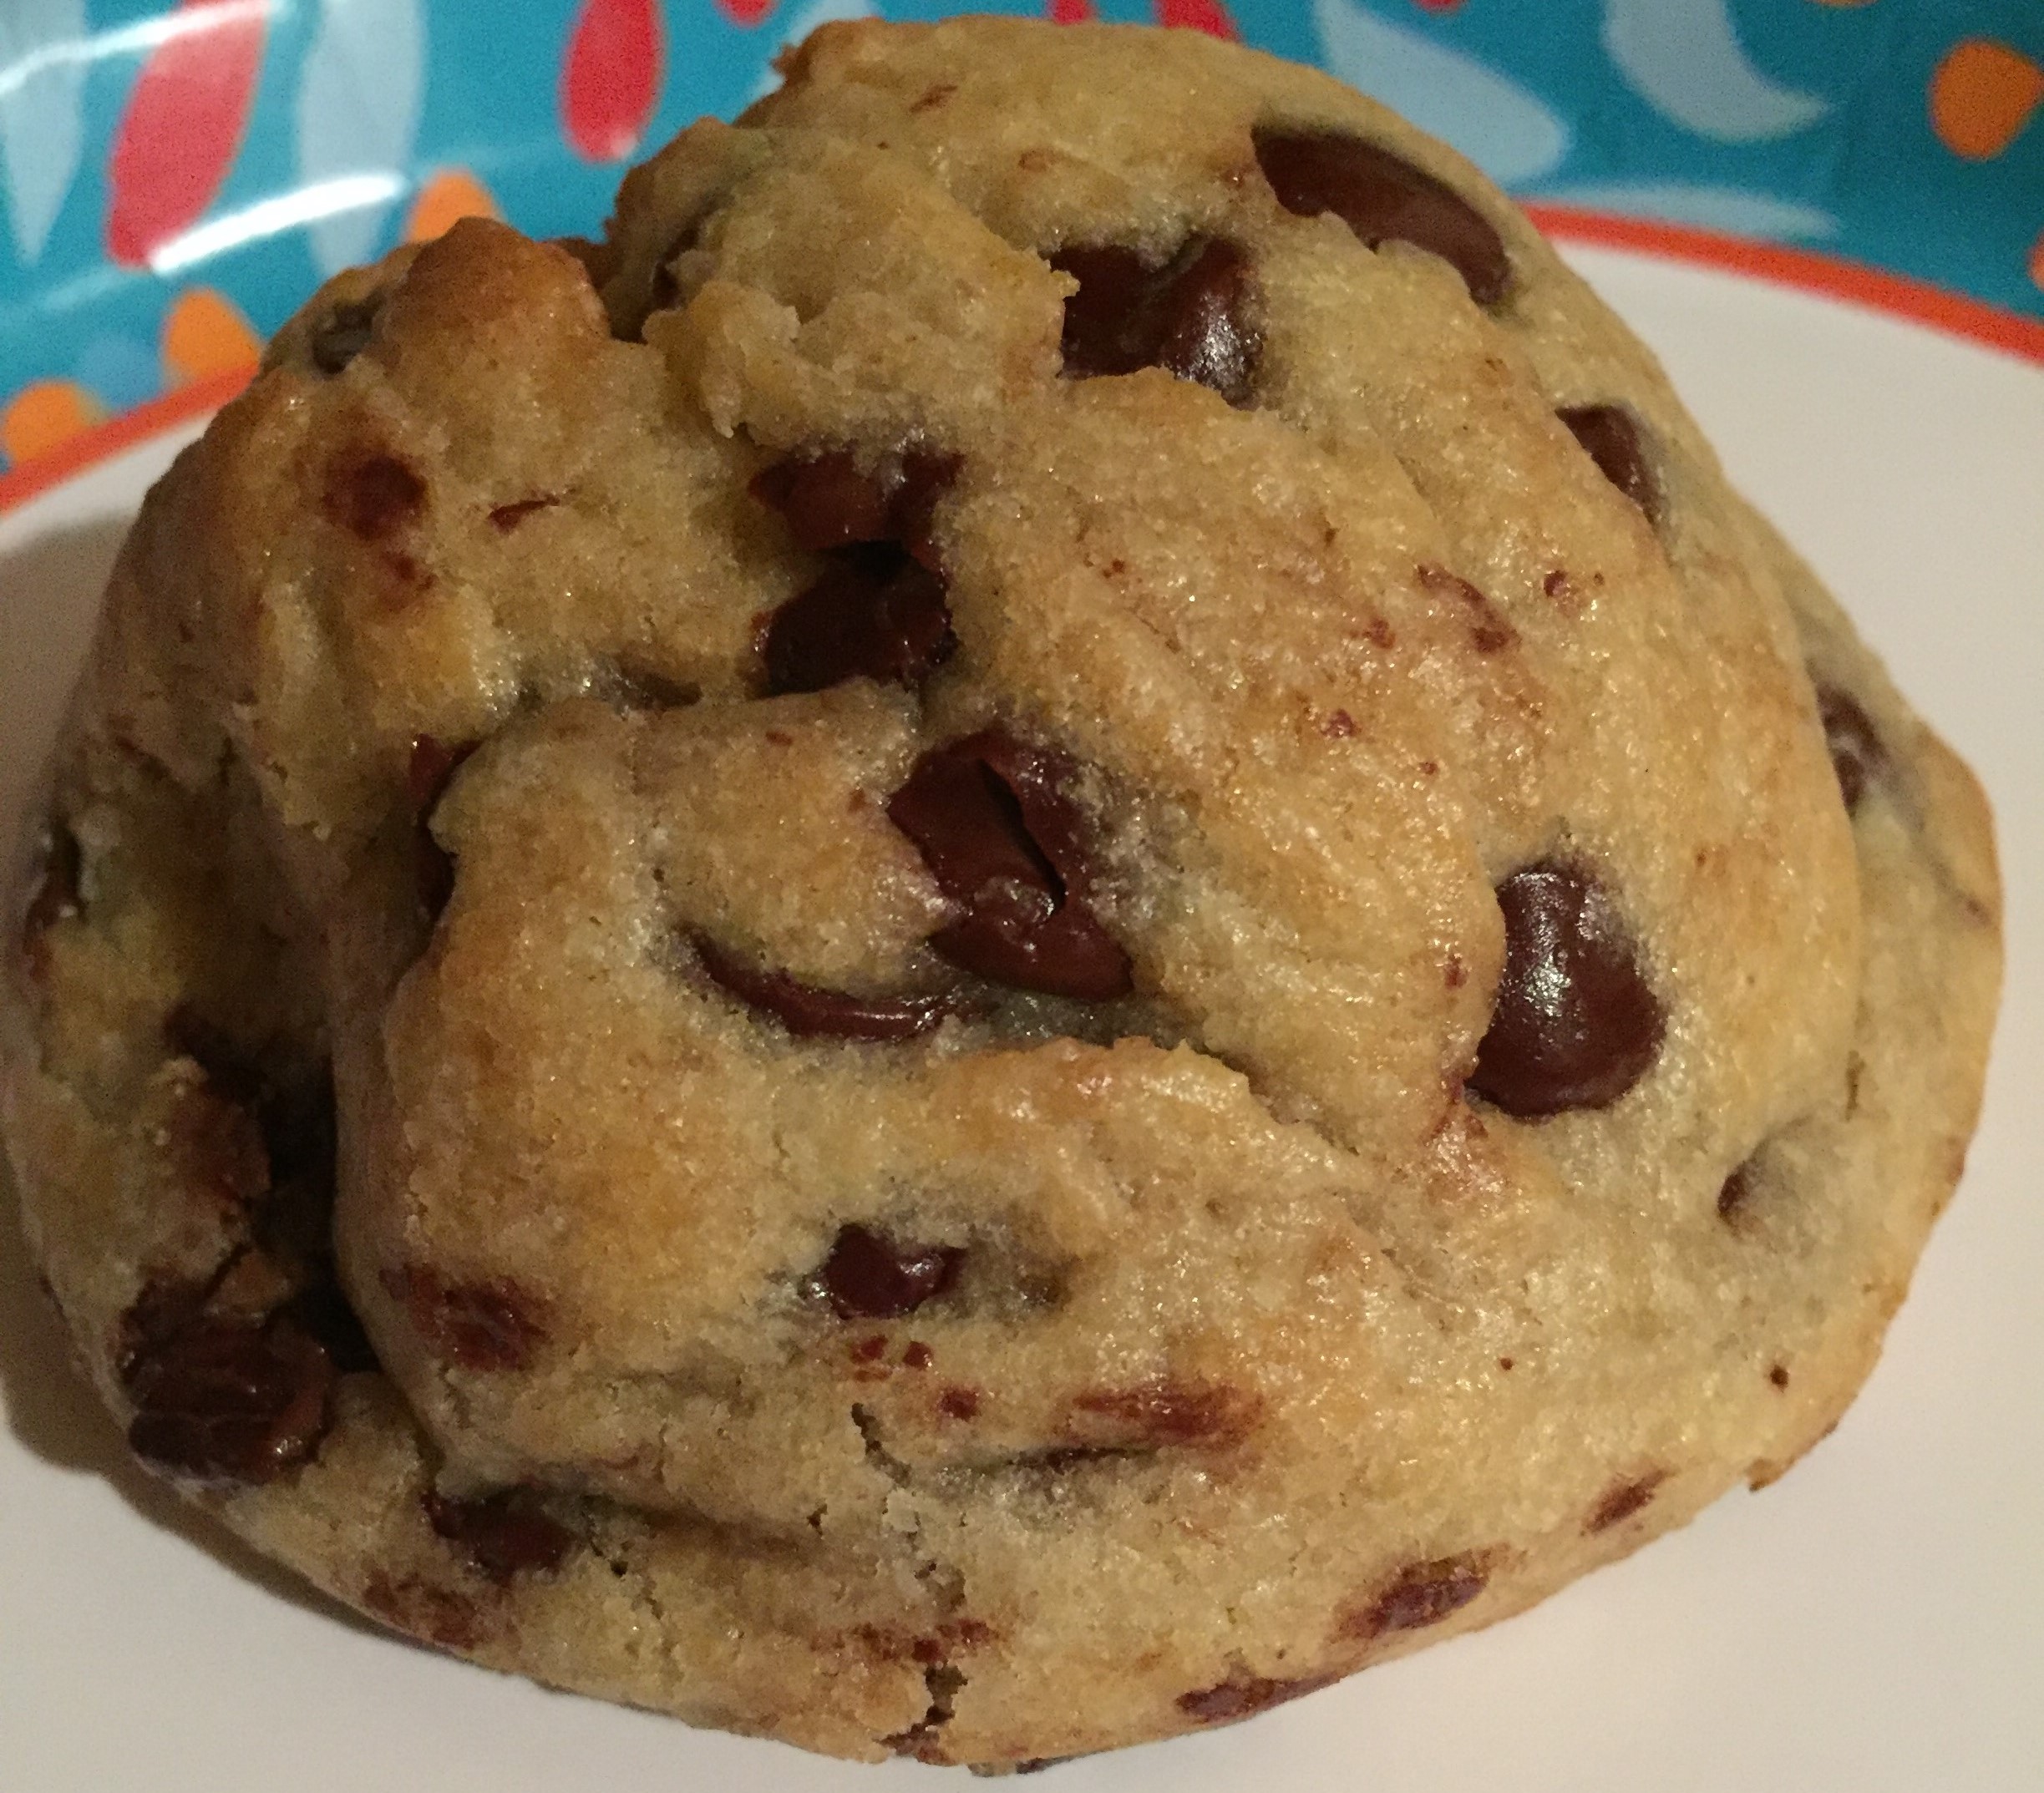 We also brought home chocolate chip cookies. These were big, soft, chocolate chip cookies. JT loved them.